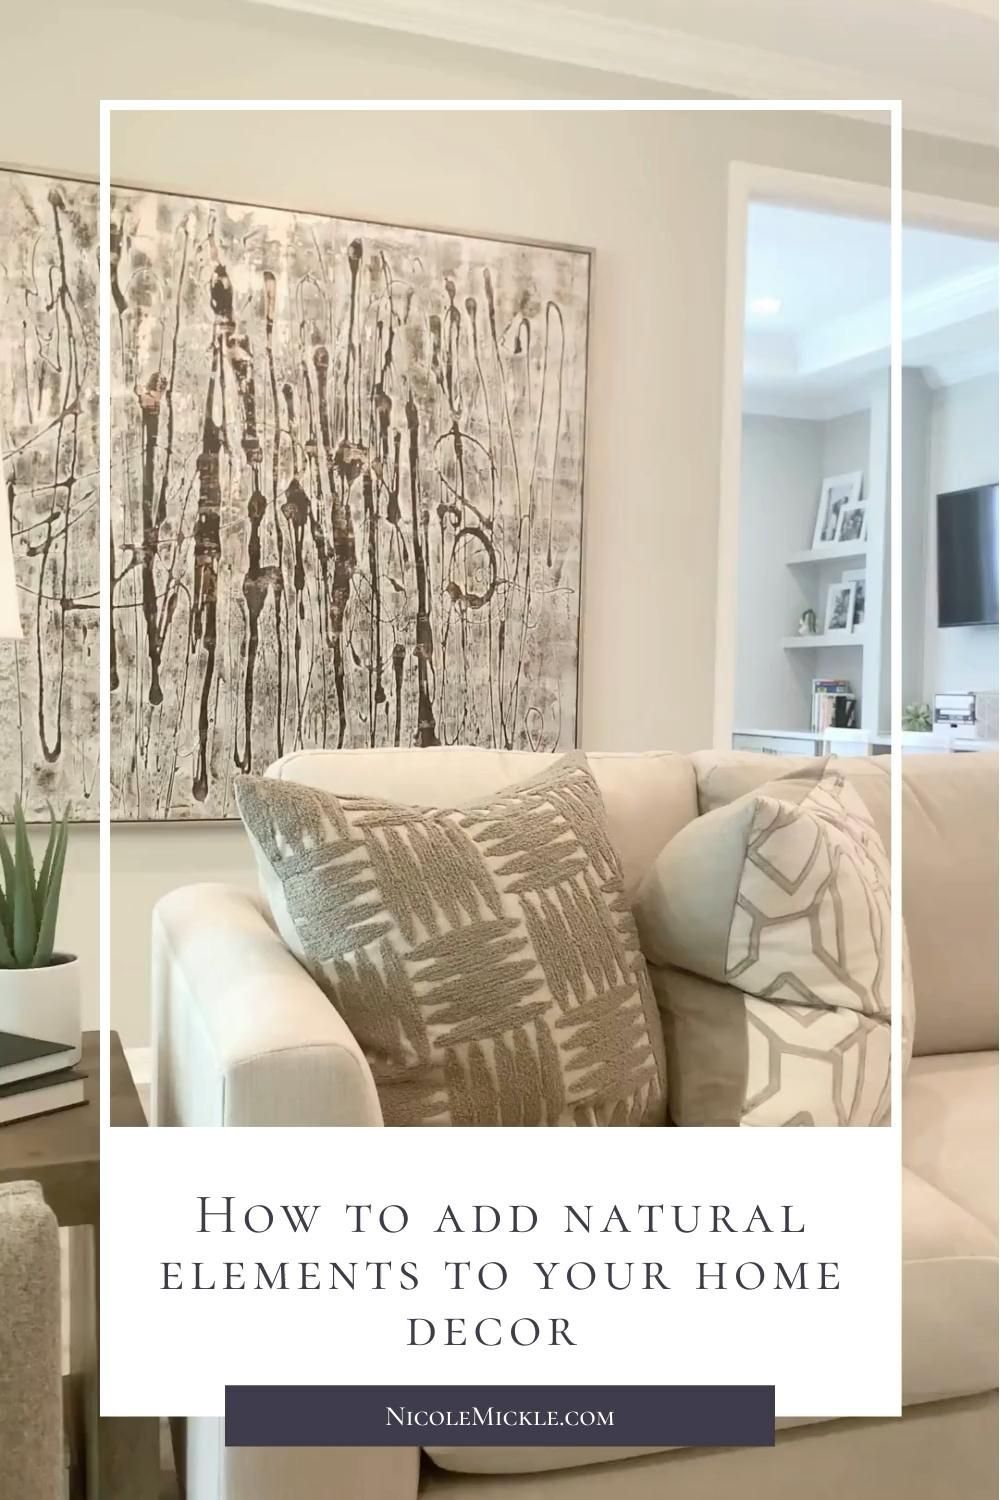 Easy Ways to Add Natural Elements to Your Home -   19 diy Pillows painted ideas